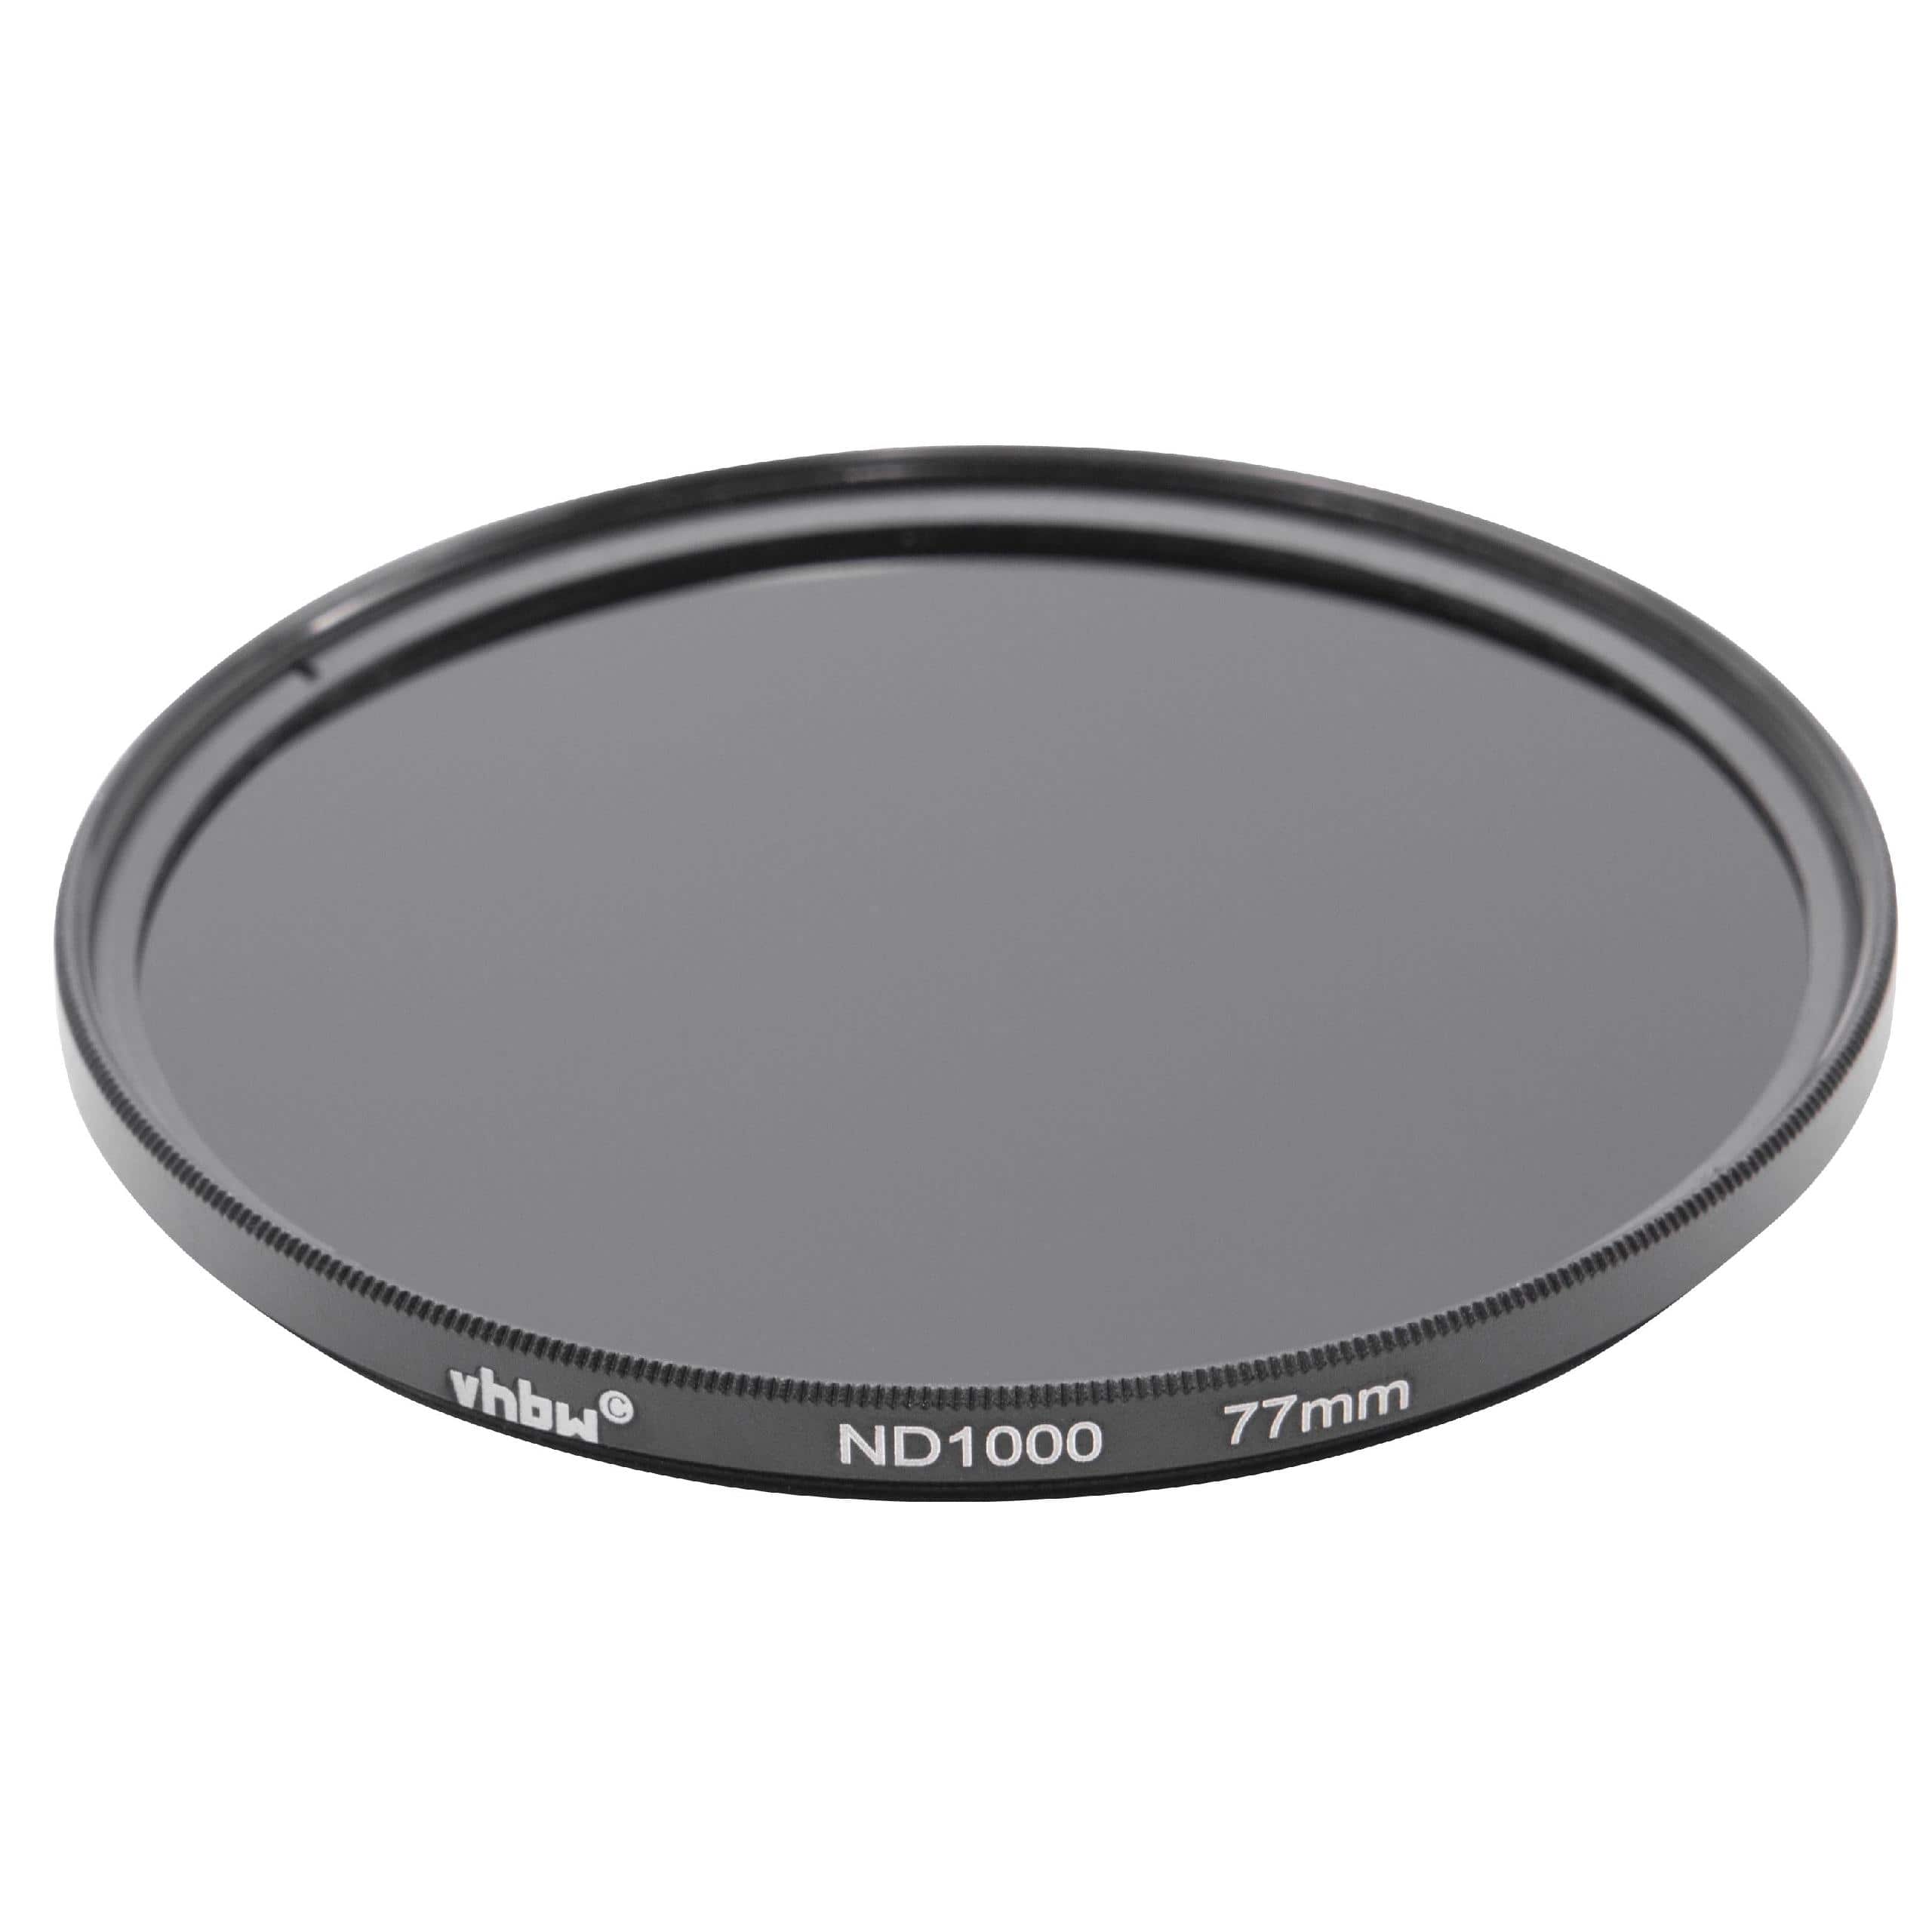 Universal ND Filter ND 1000 suitable for Camera Lenses with 77 mm Filter Thread - Grey Filter